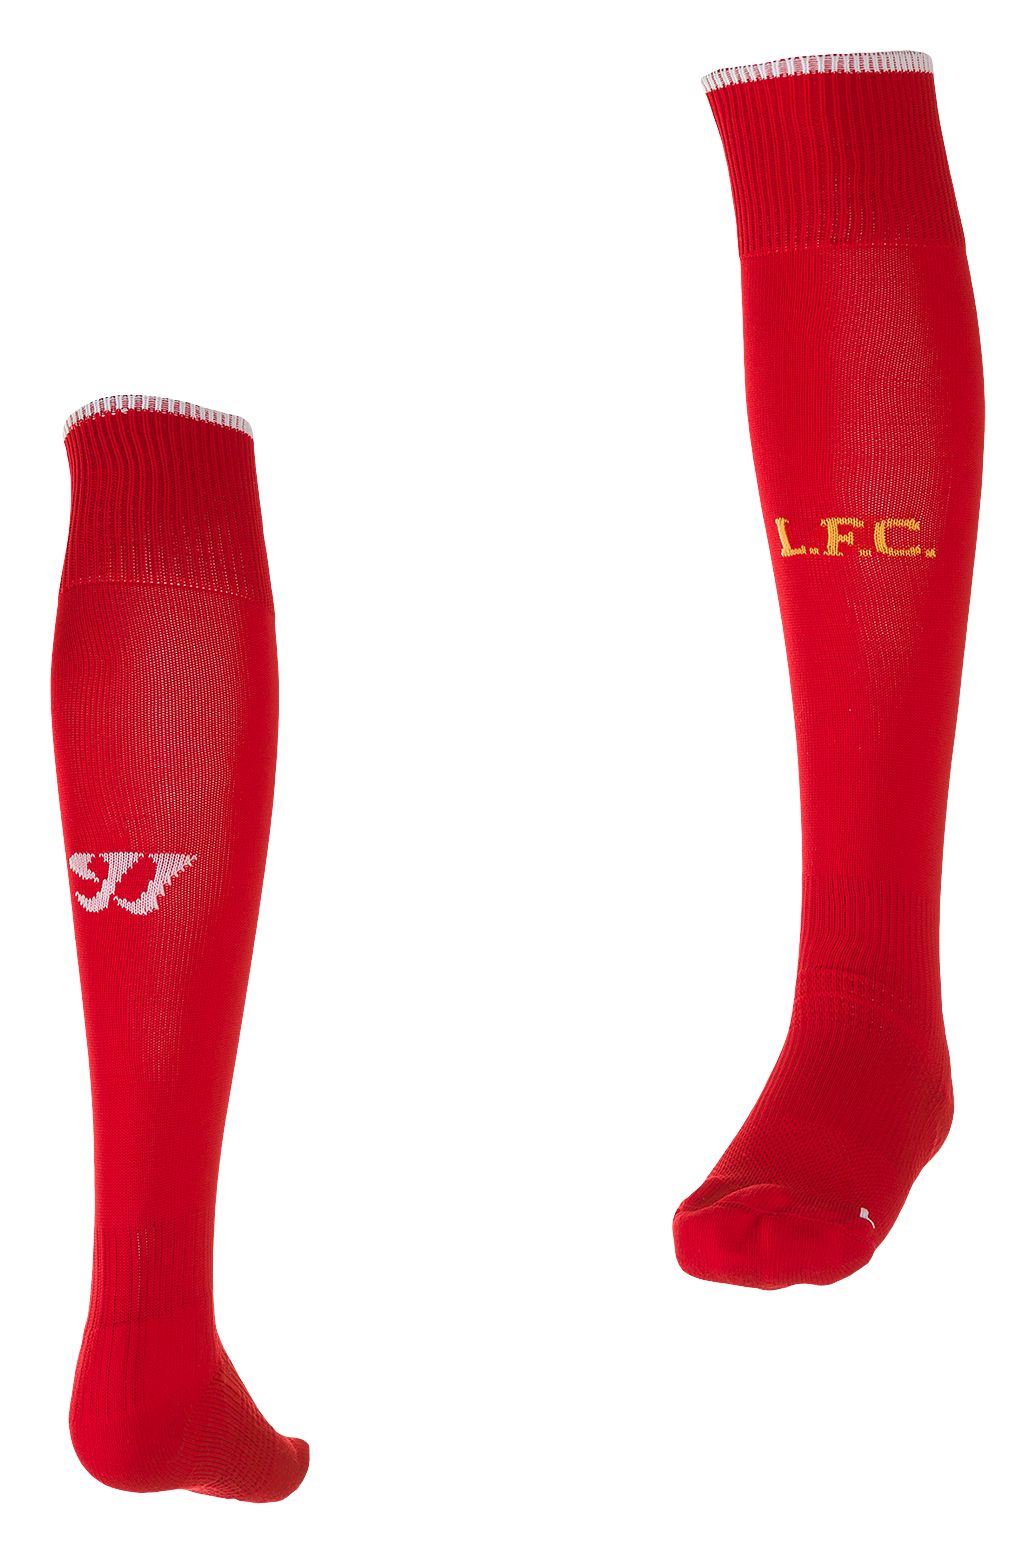 Liverpool Home Sock 2014/15, High Risk Red image number 0